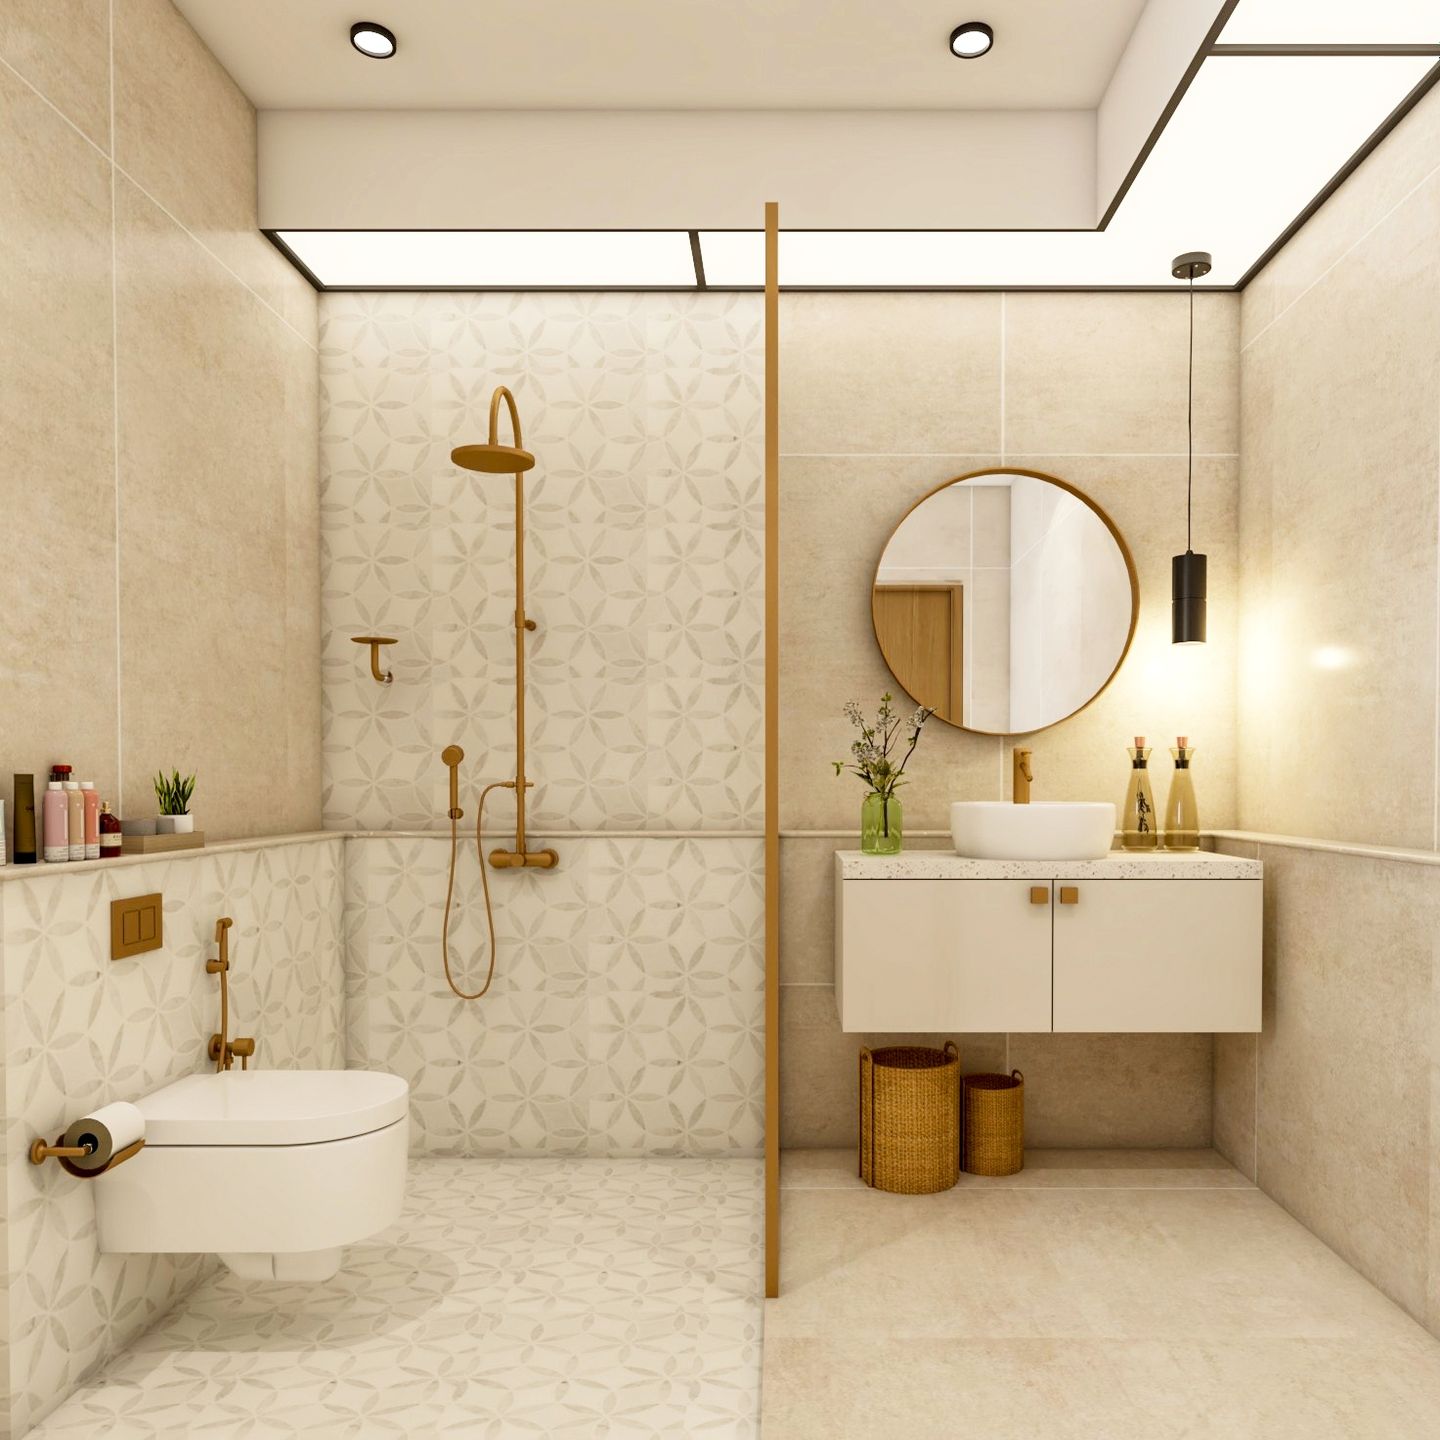 Beige And White Bathroom Design With Partition Wall - Livspace